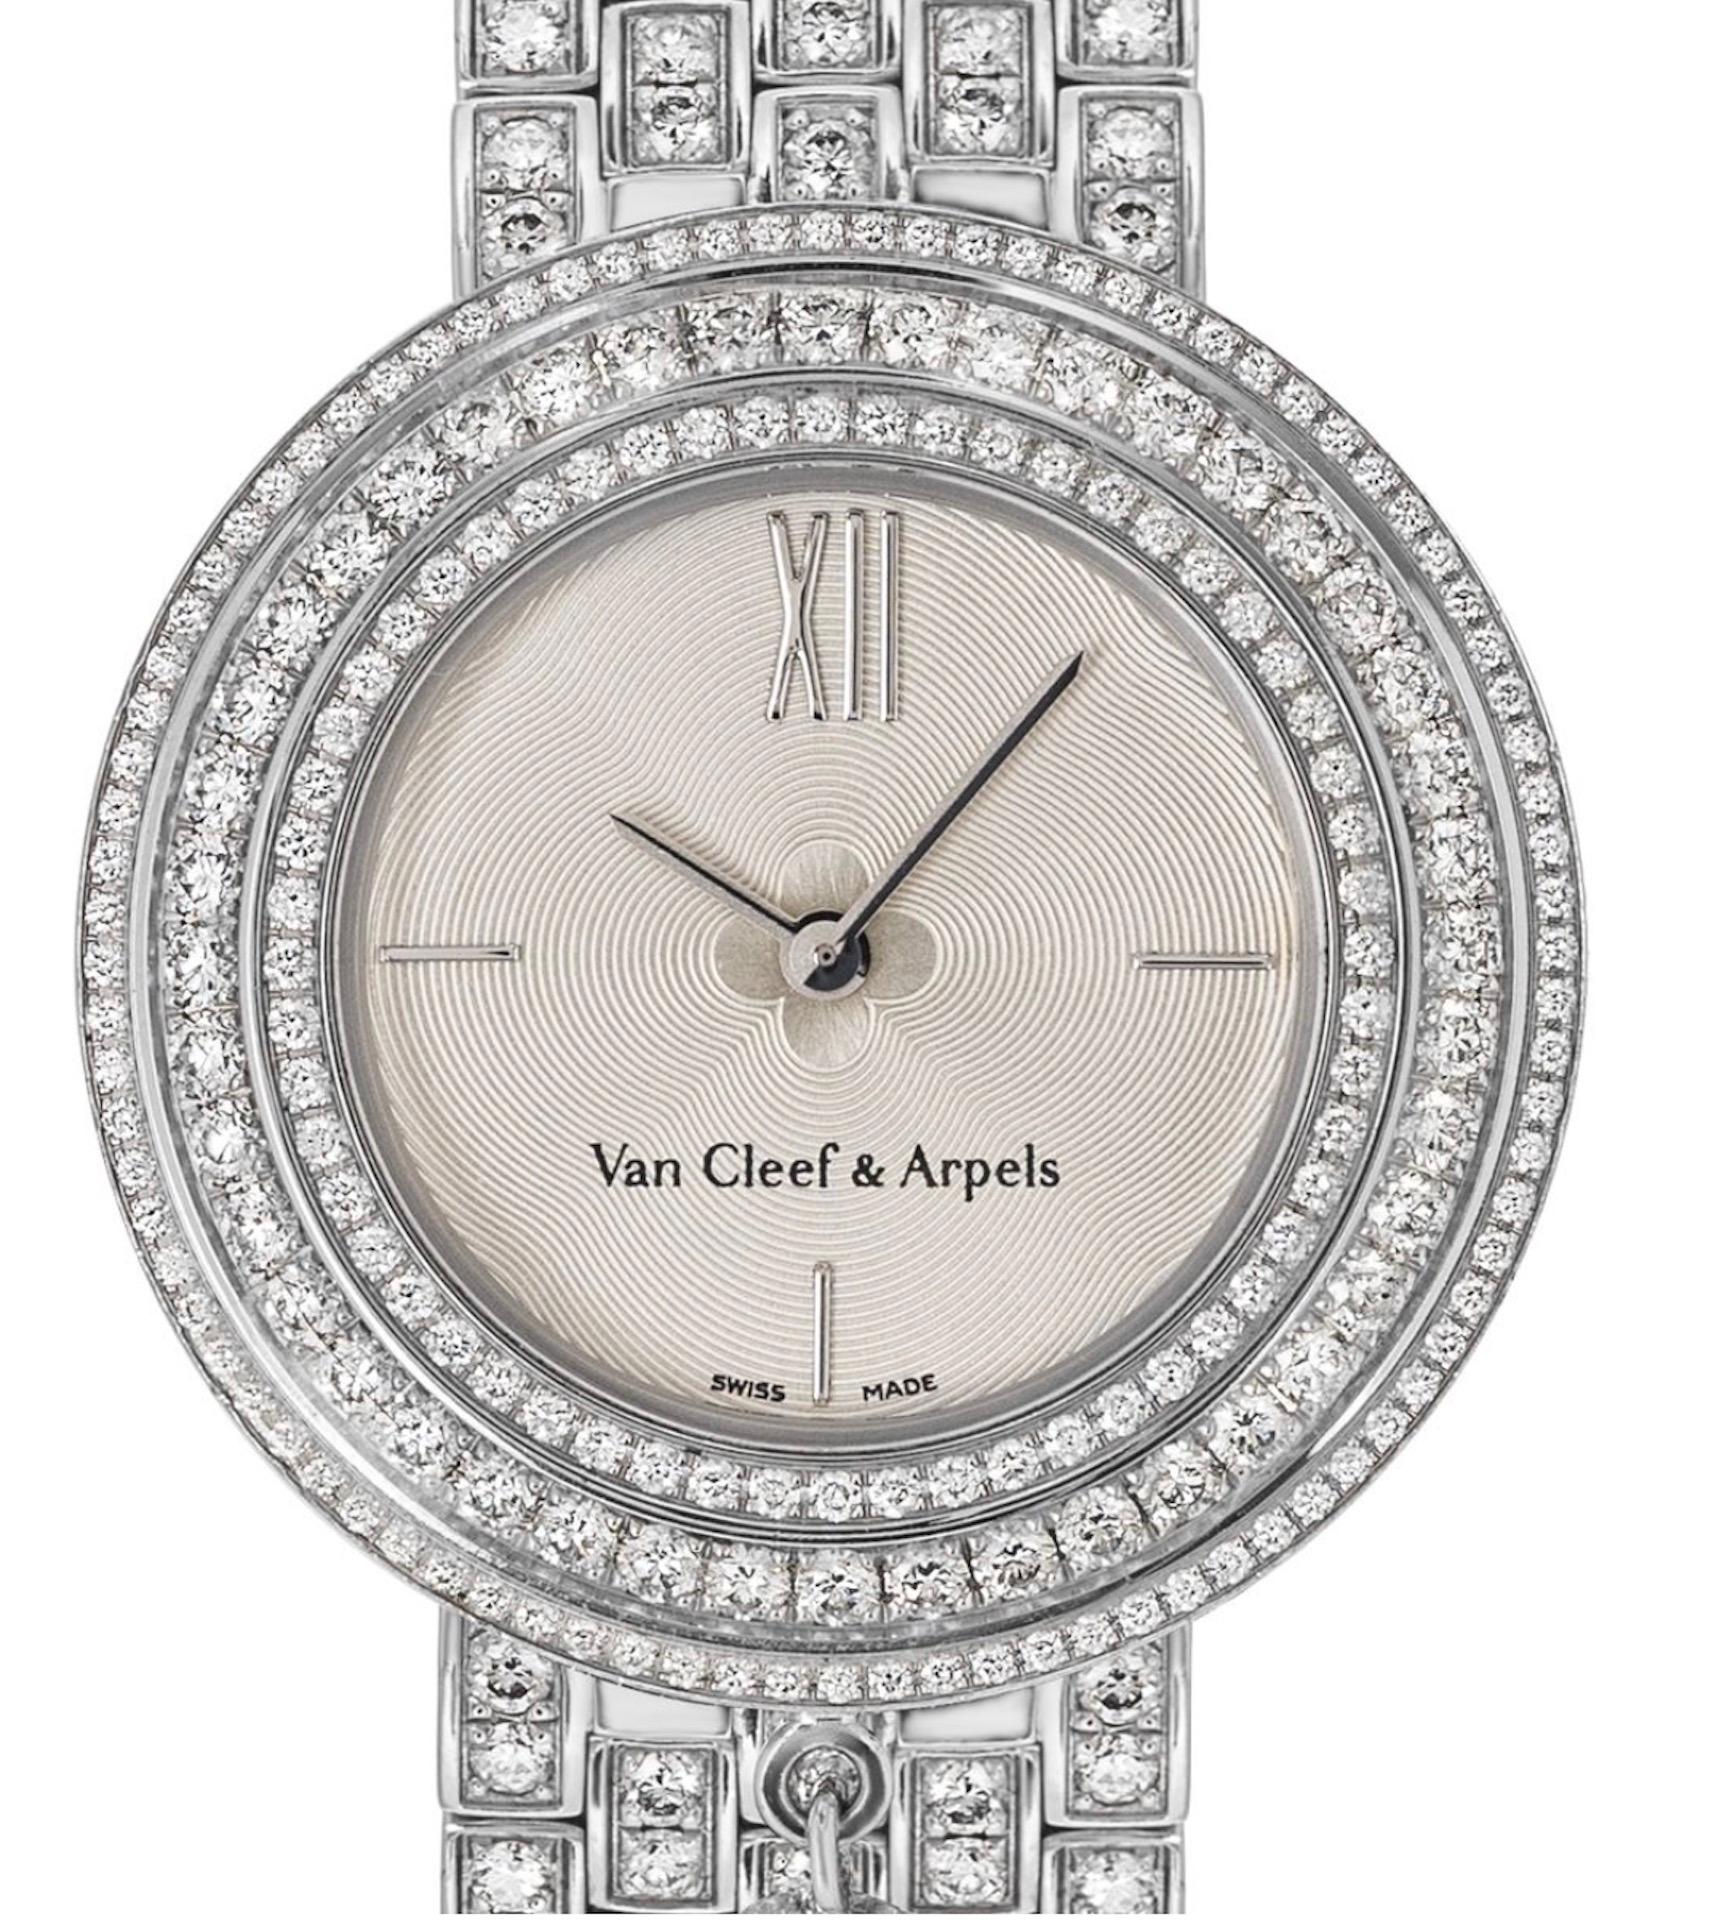 A striking ladies 32mm diamond set Charm wristwatch crafted in white gold by Van Cleef & Arpels. This timepiece features a silver guilloche dial with applied roman numeral XII and a white gold bezel set with round brilliant cut diamonds as well as a